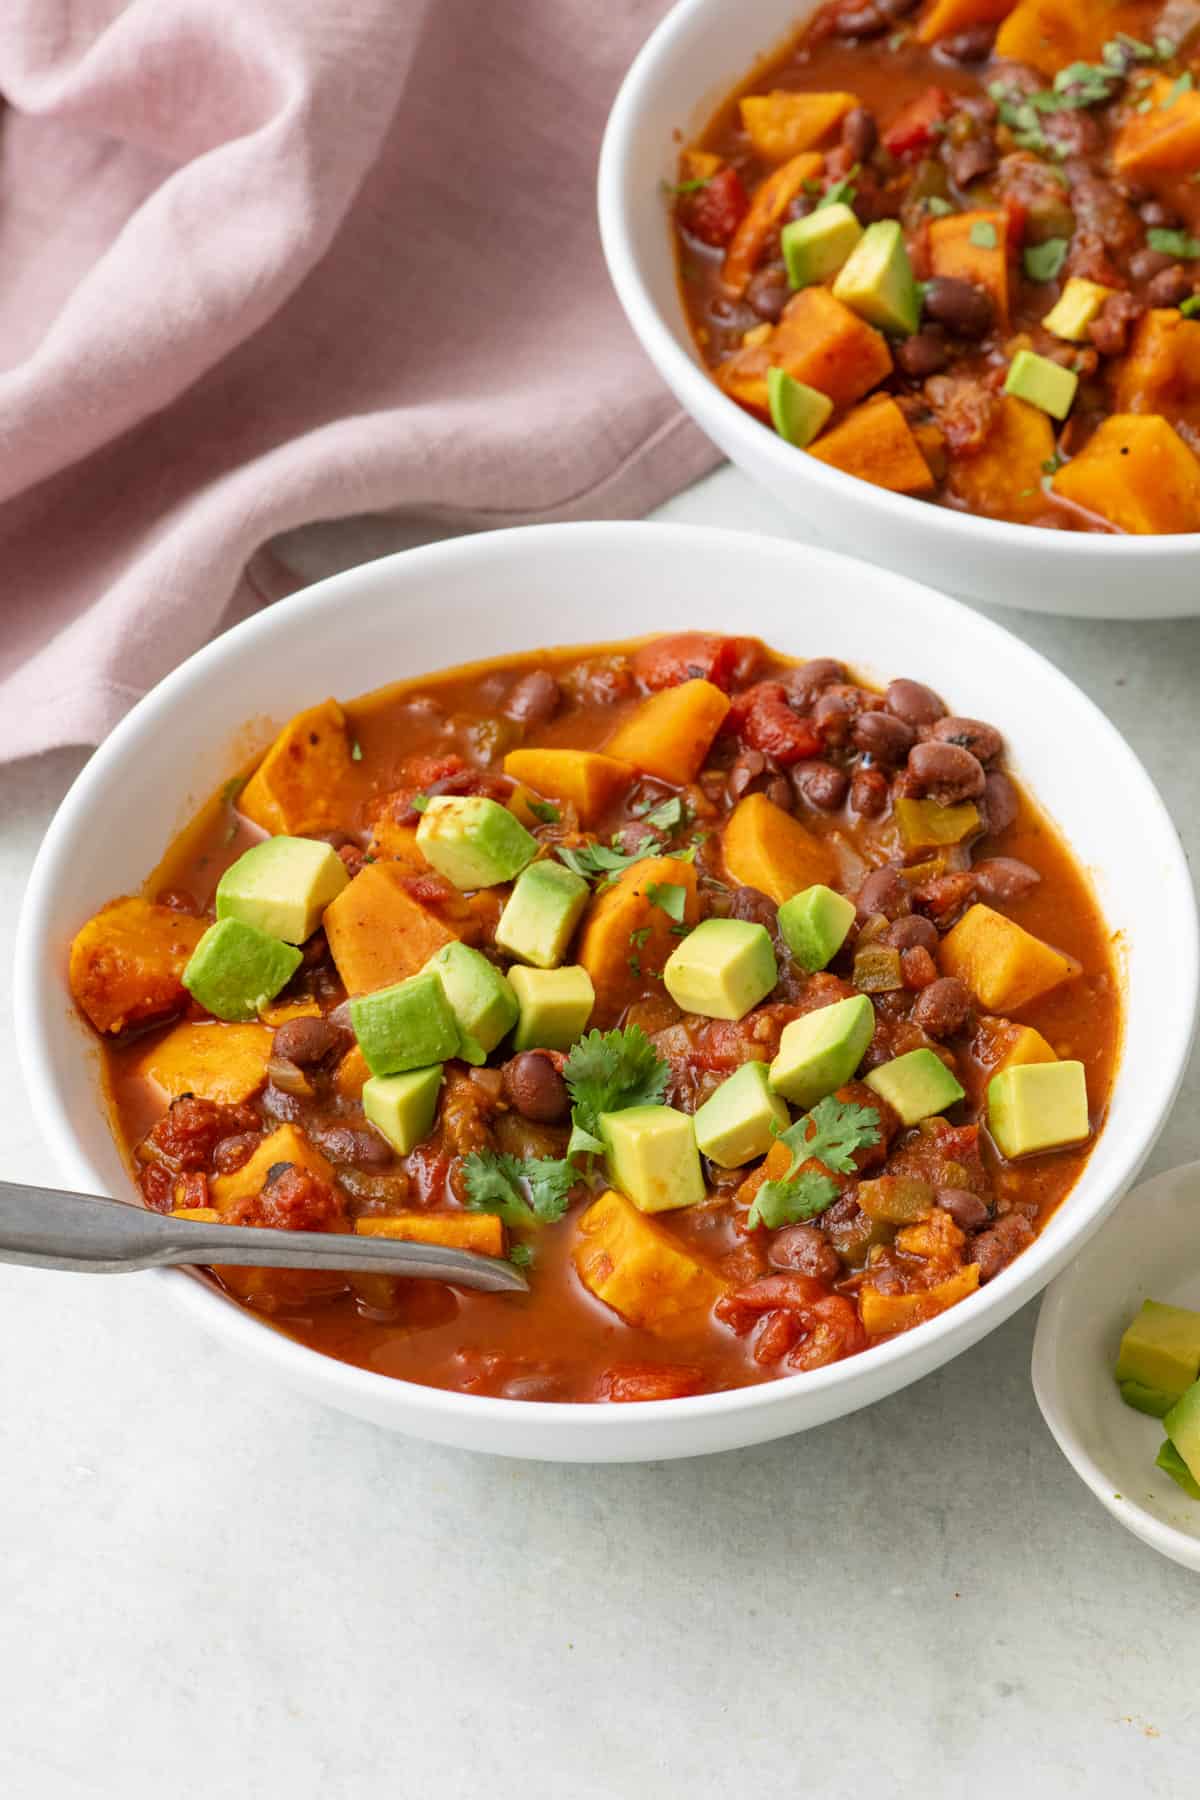 Bowl of sweet potato chili topped with diced avocado and a spoon dipped in. Another bowl of chili nearby.